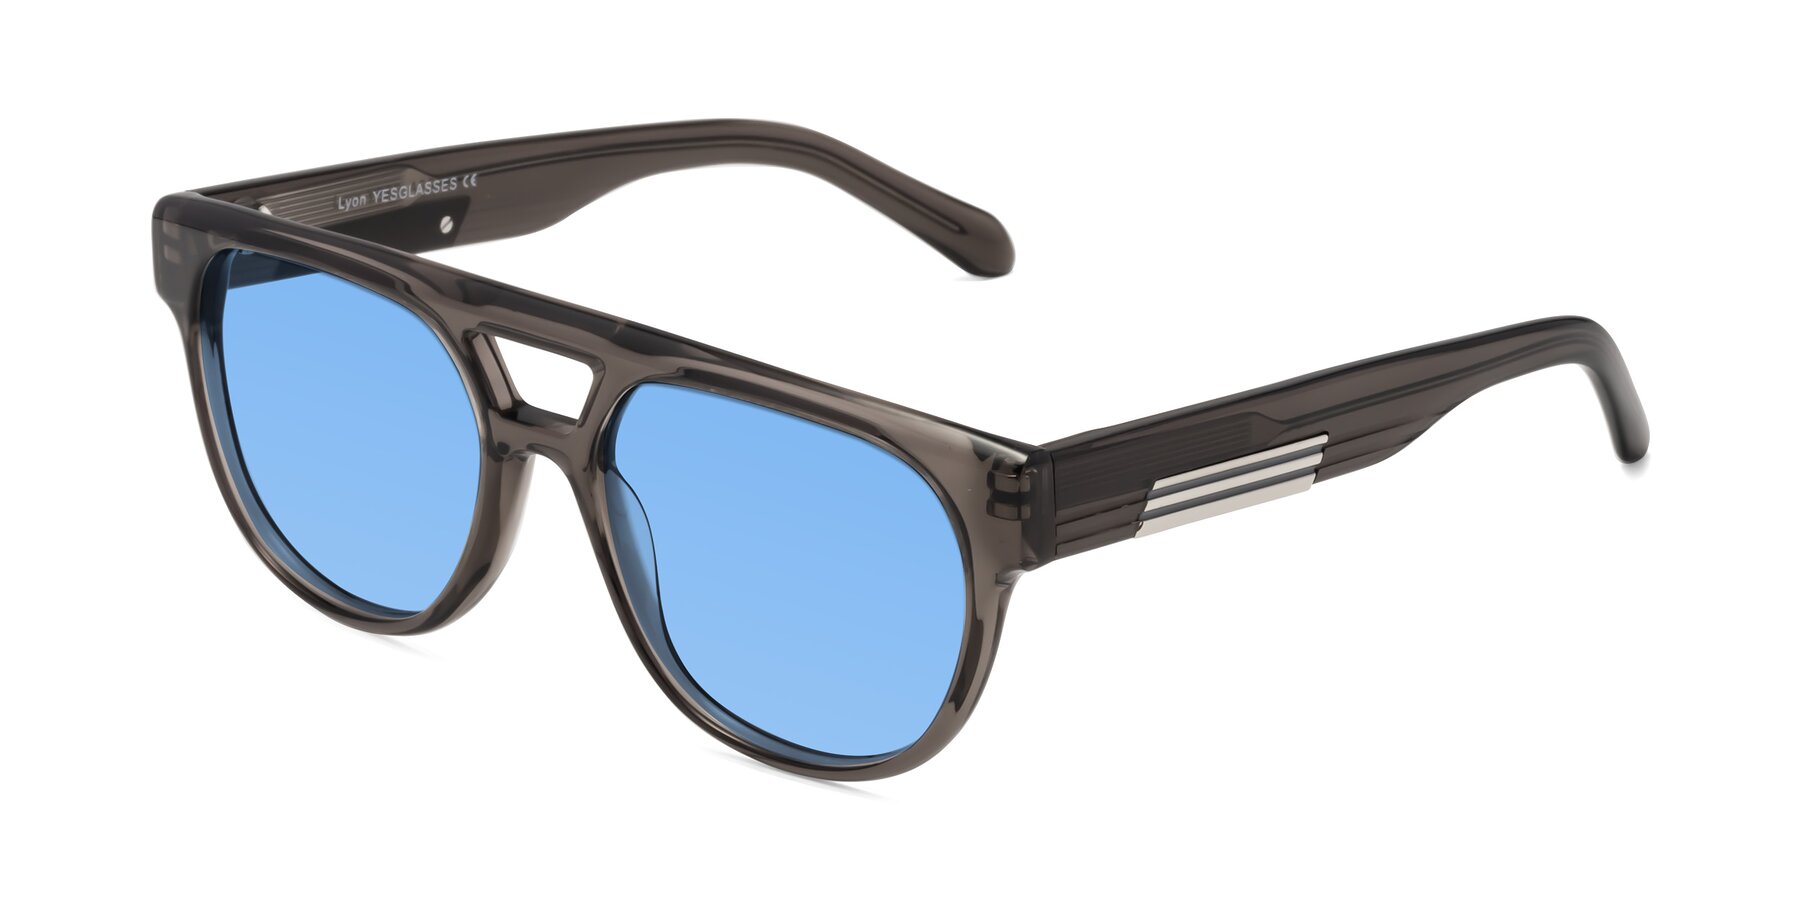 Angle of Lyon in Charcoal Gray with Medium Blue Tinted Lenses